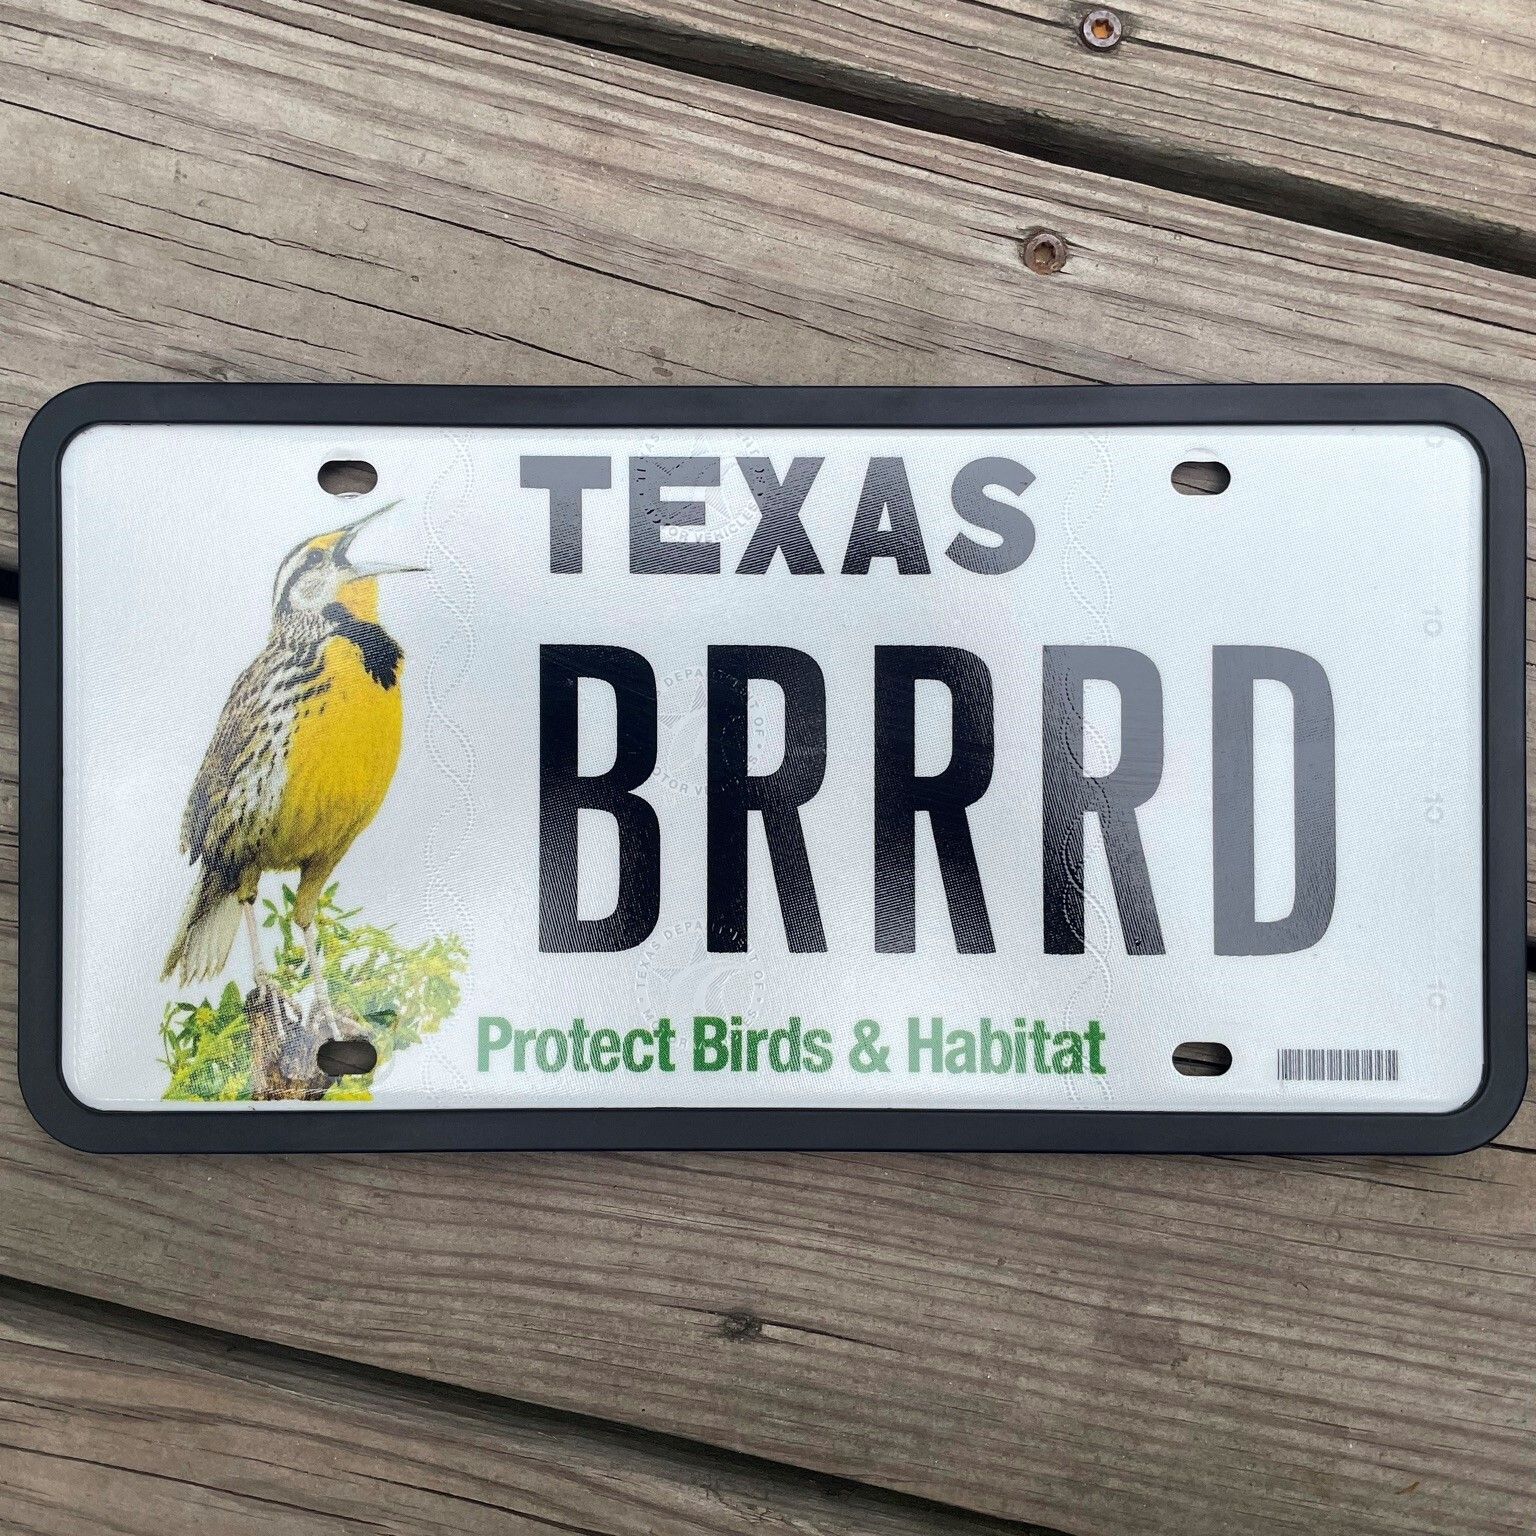 Get your conservation license plate